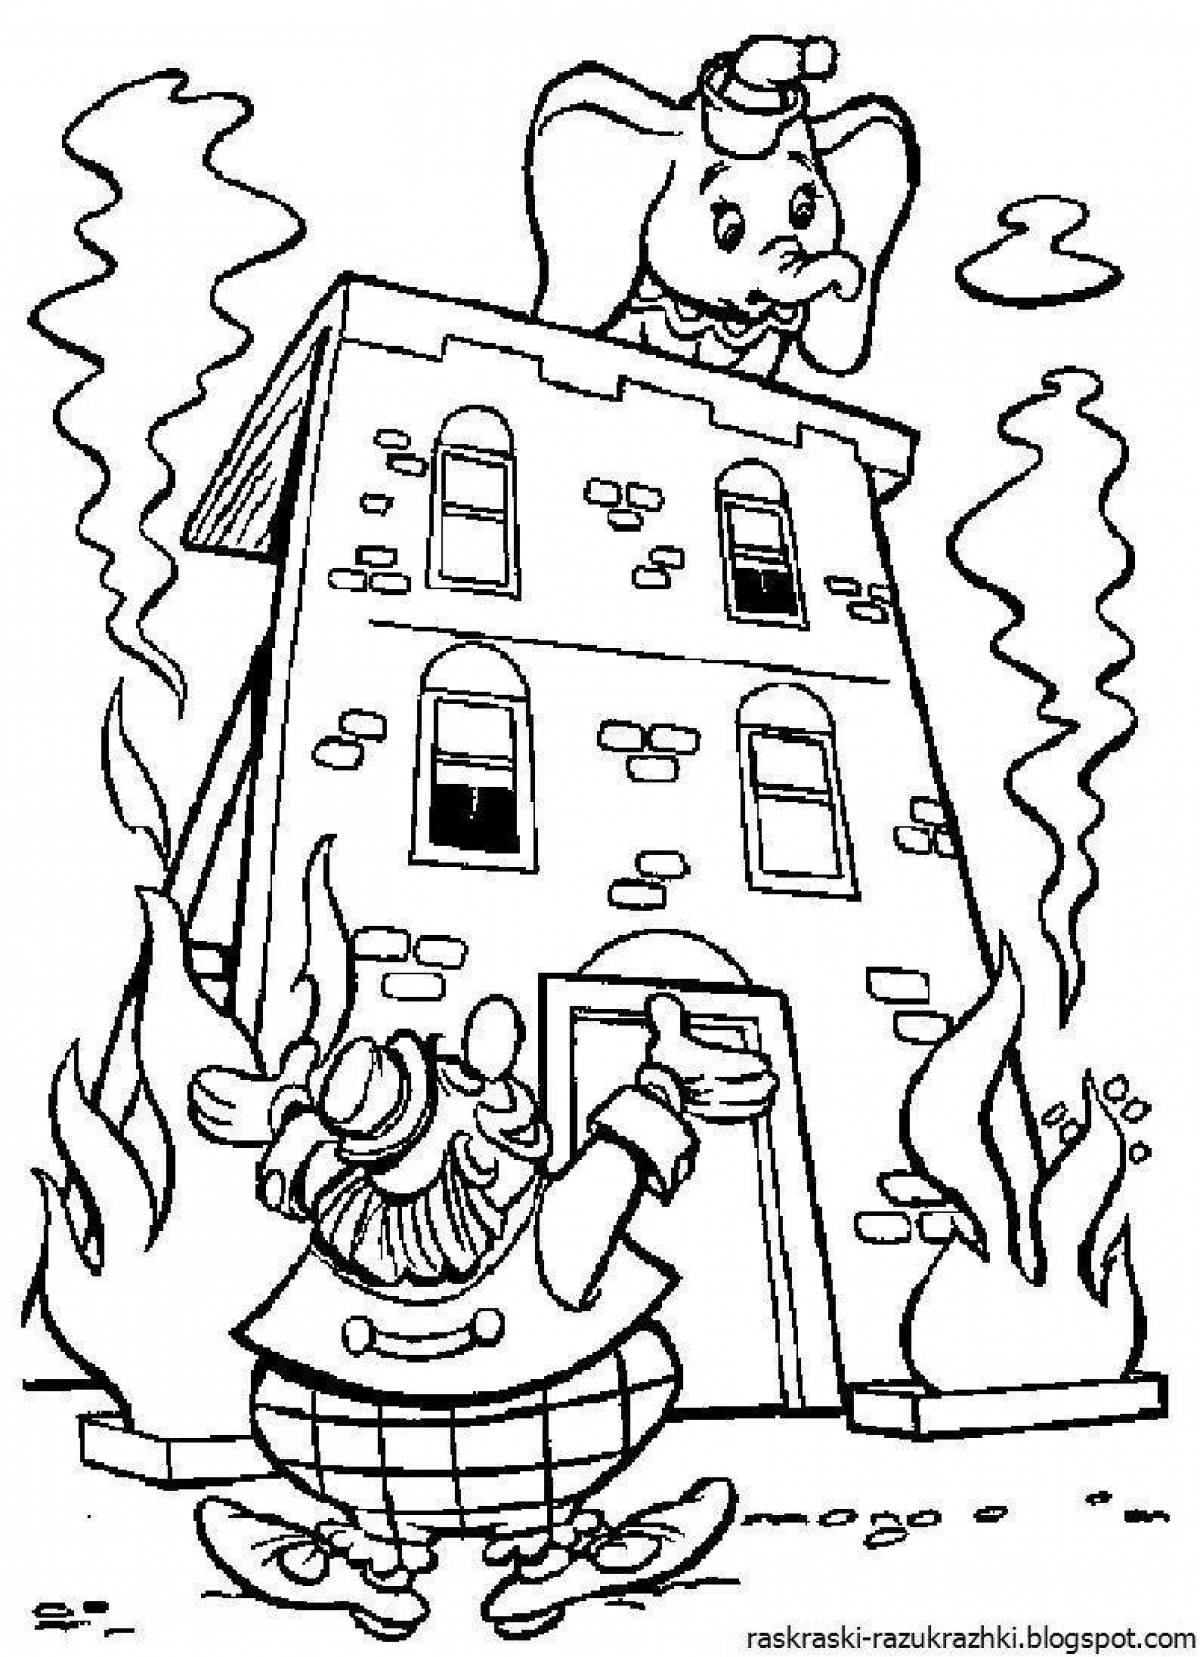 Colorful fire safety coloring pages for children 6-7 years old